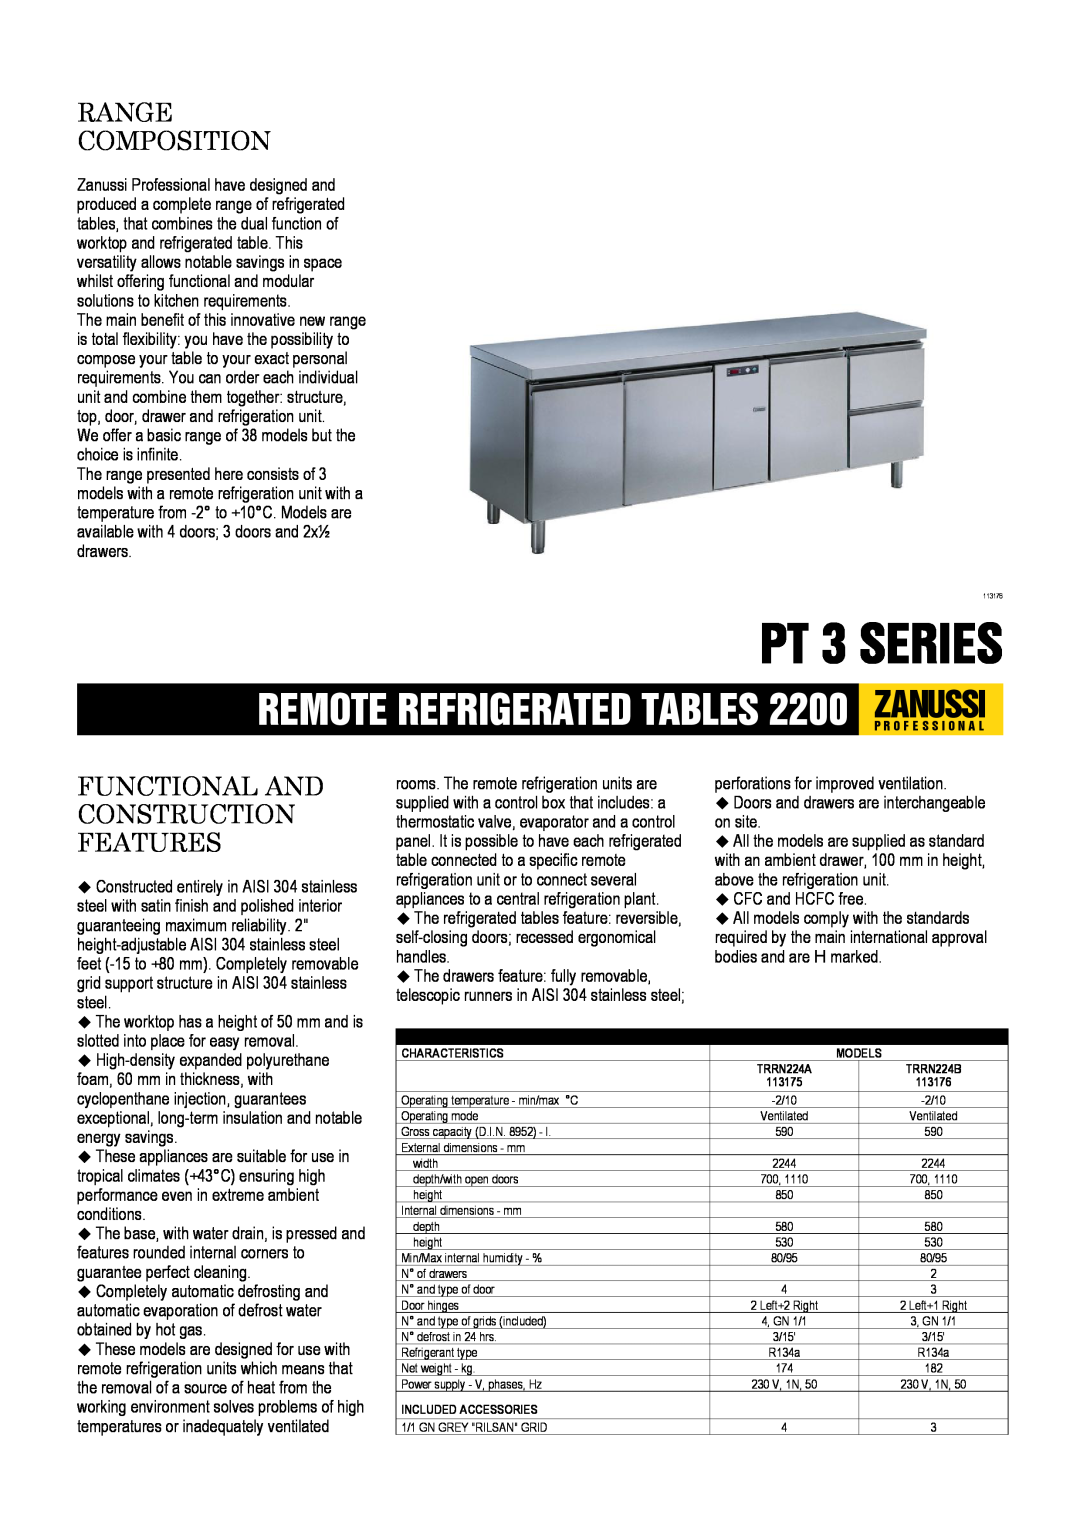 Zanussi 113176, 113175, TRRN224B, TRRN224A dimensions PT 3 SERIES, Range Composition, Functional And Construction Features 